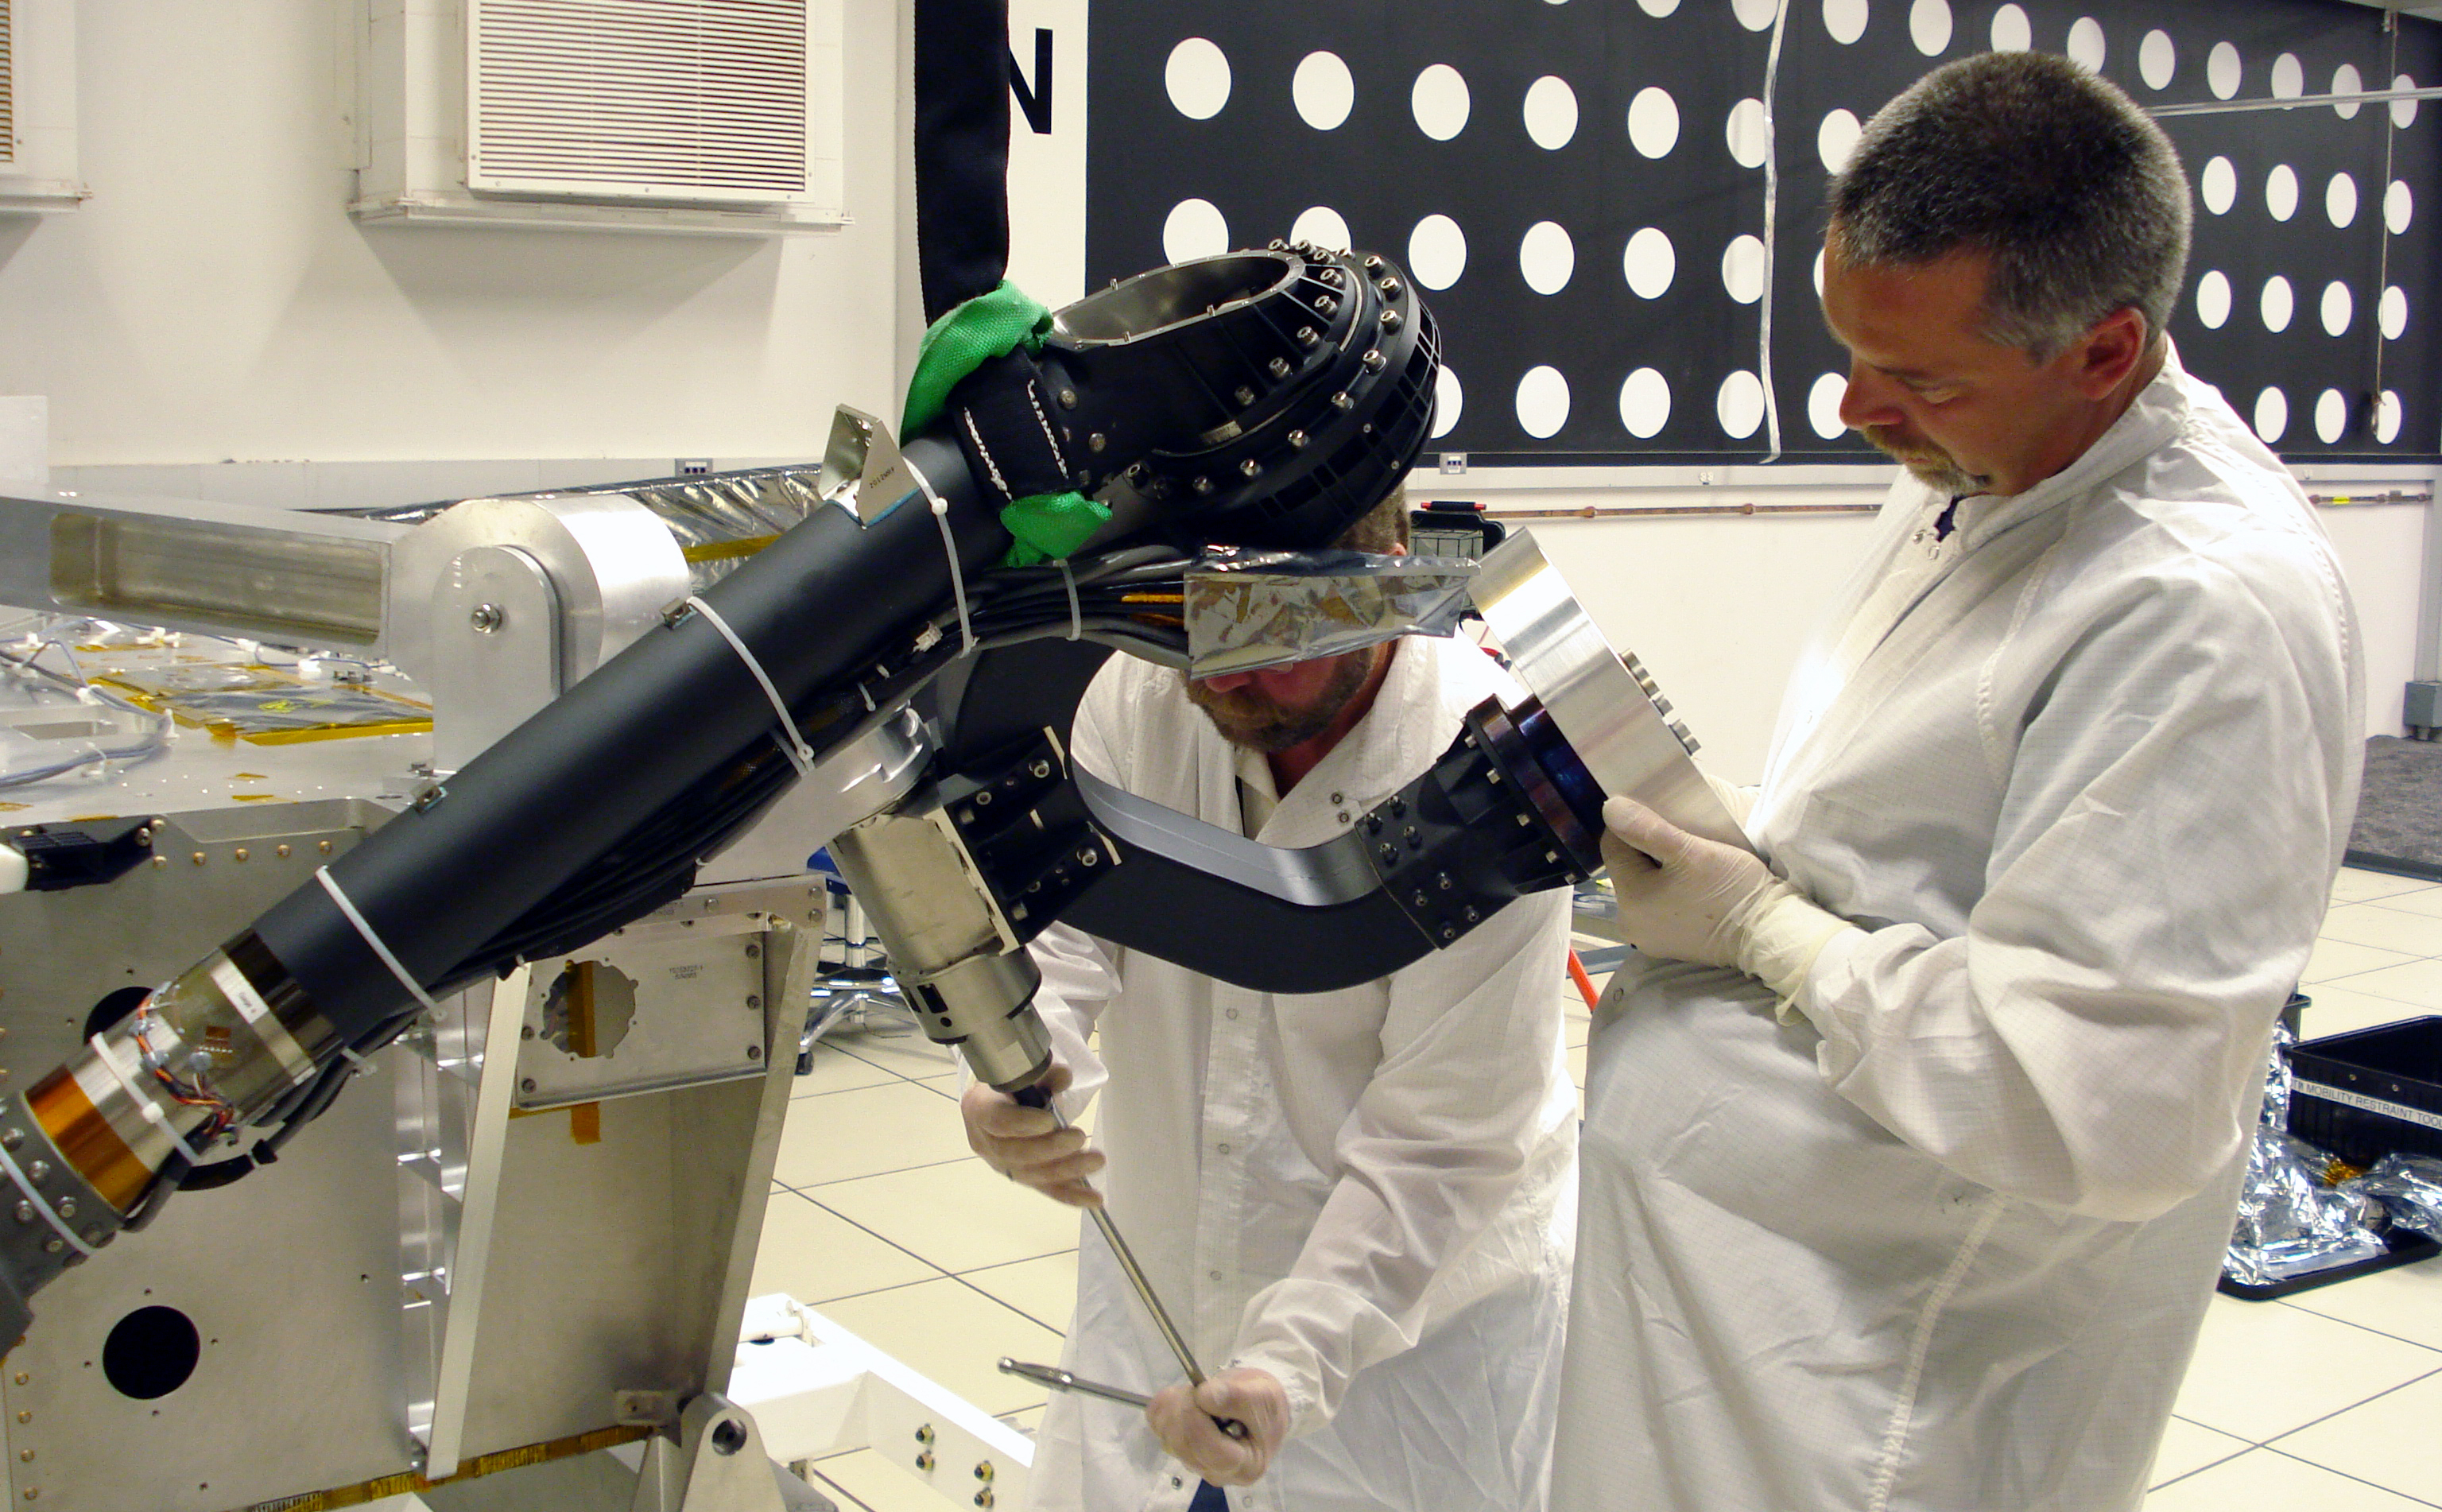 In this image, two technicians from the Mars Science Laboratory team prepare the rover's mobility system for instrumentation tests.  They are both wearing white coats and gloves as they each work on one of the rover's 'legs' in a white-tiled room.